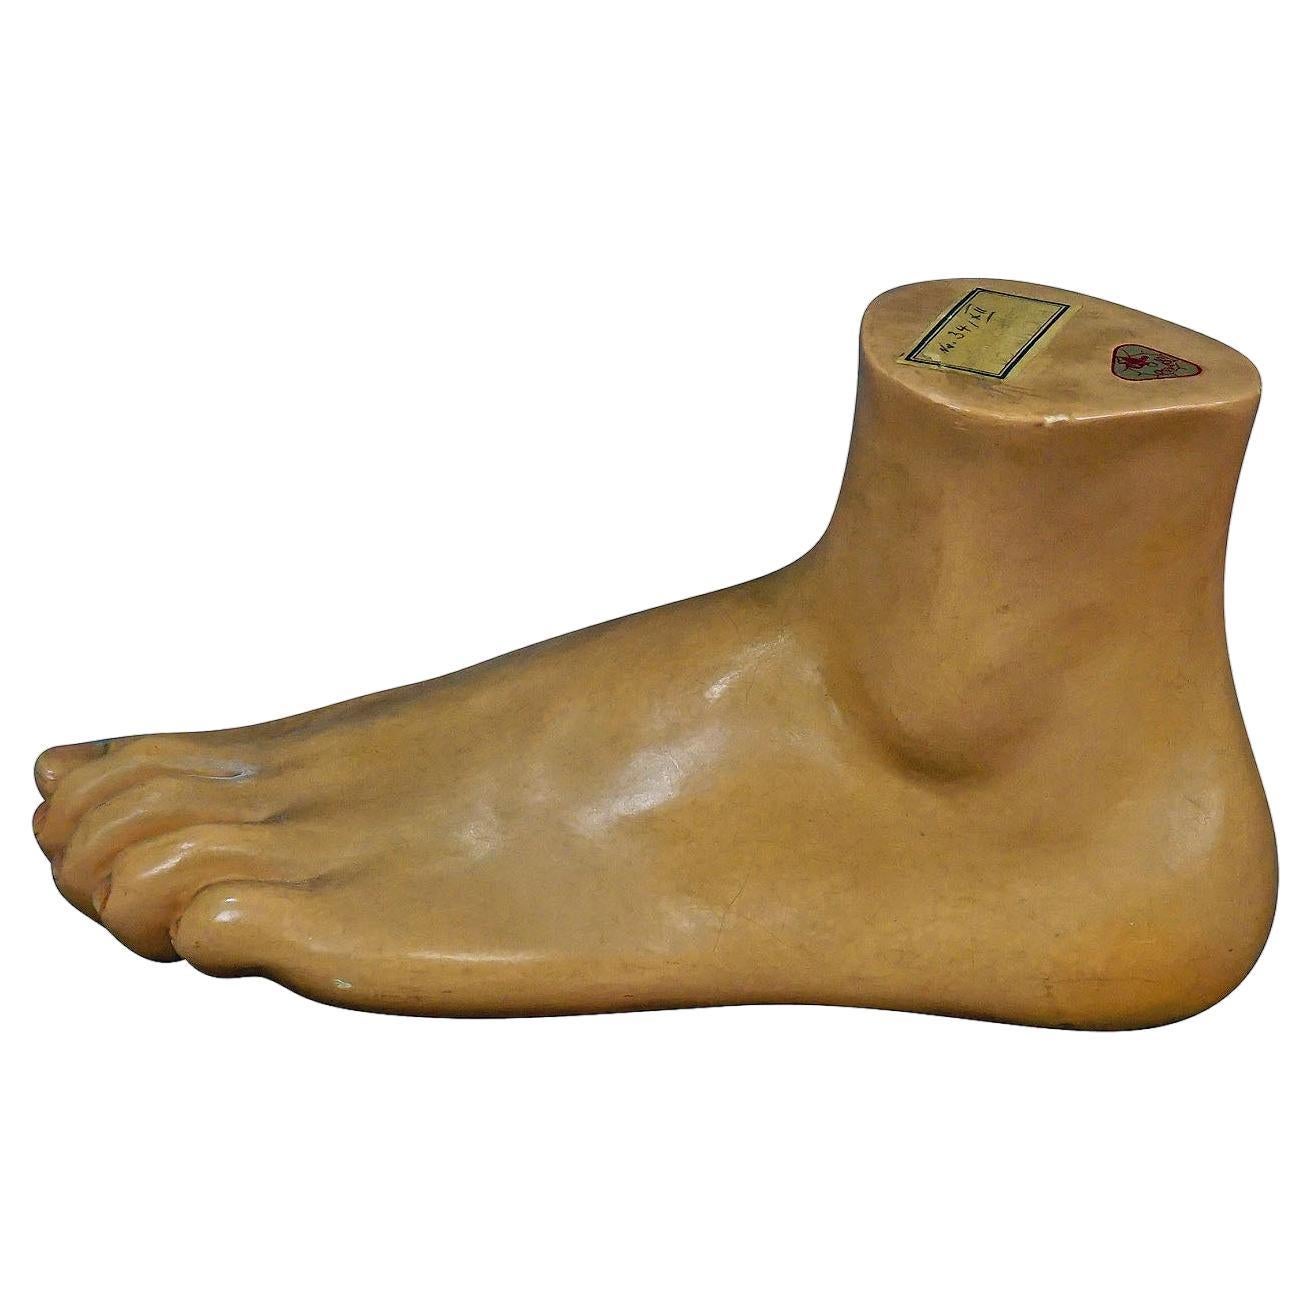 Antique 3D Anatomical Foot Model Made by SOMSO ca. 1930